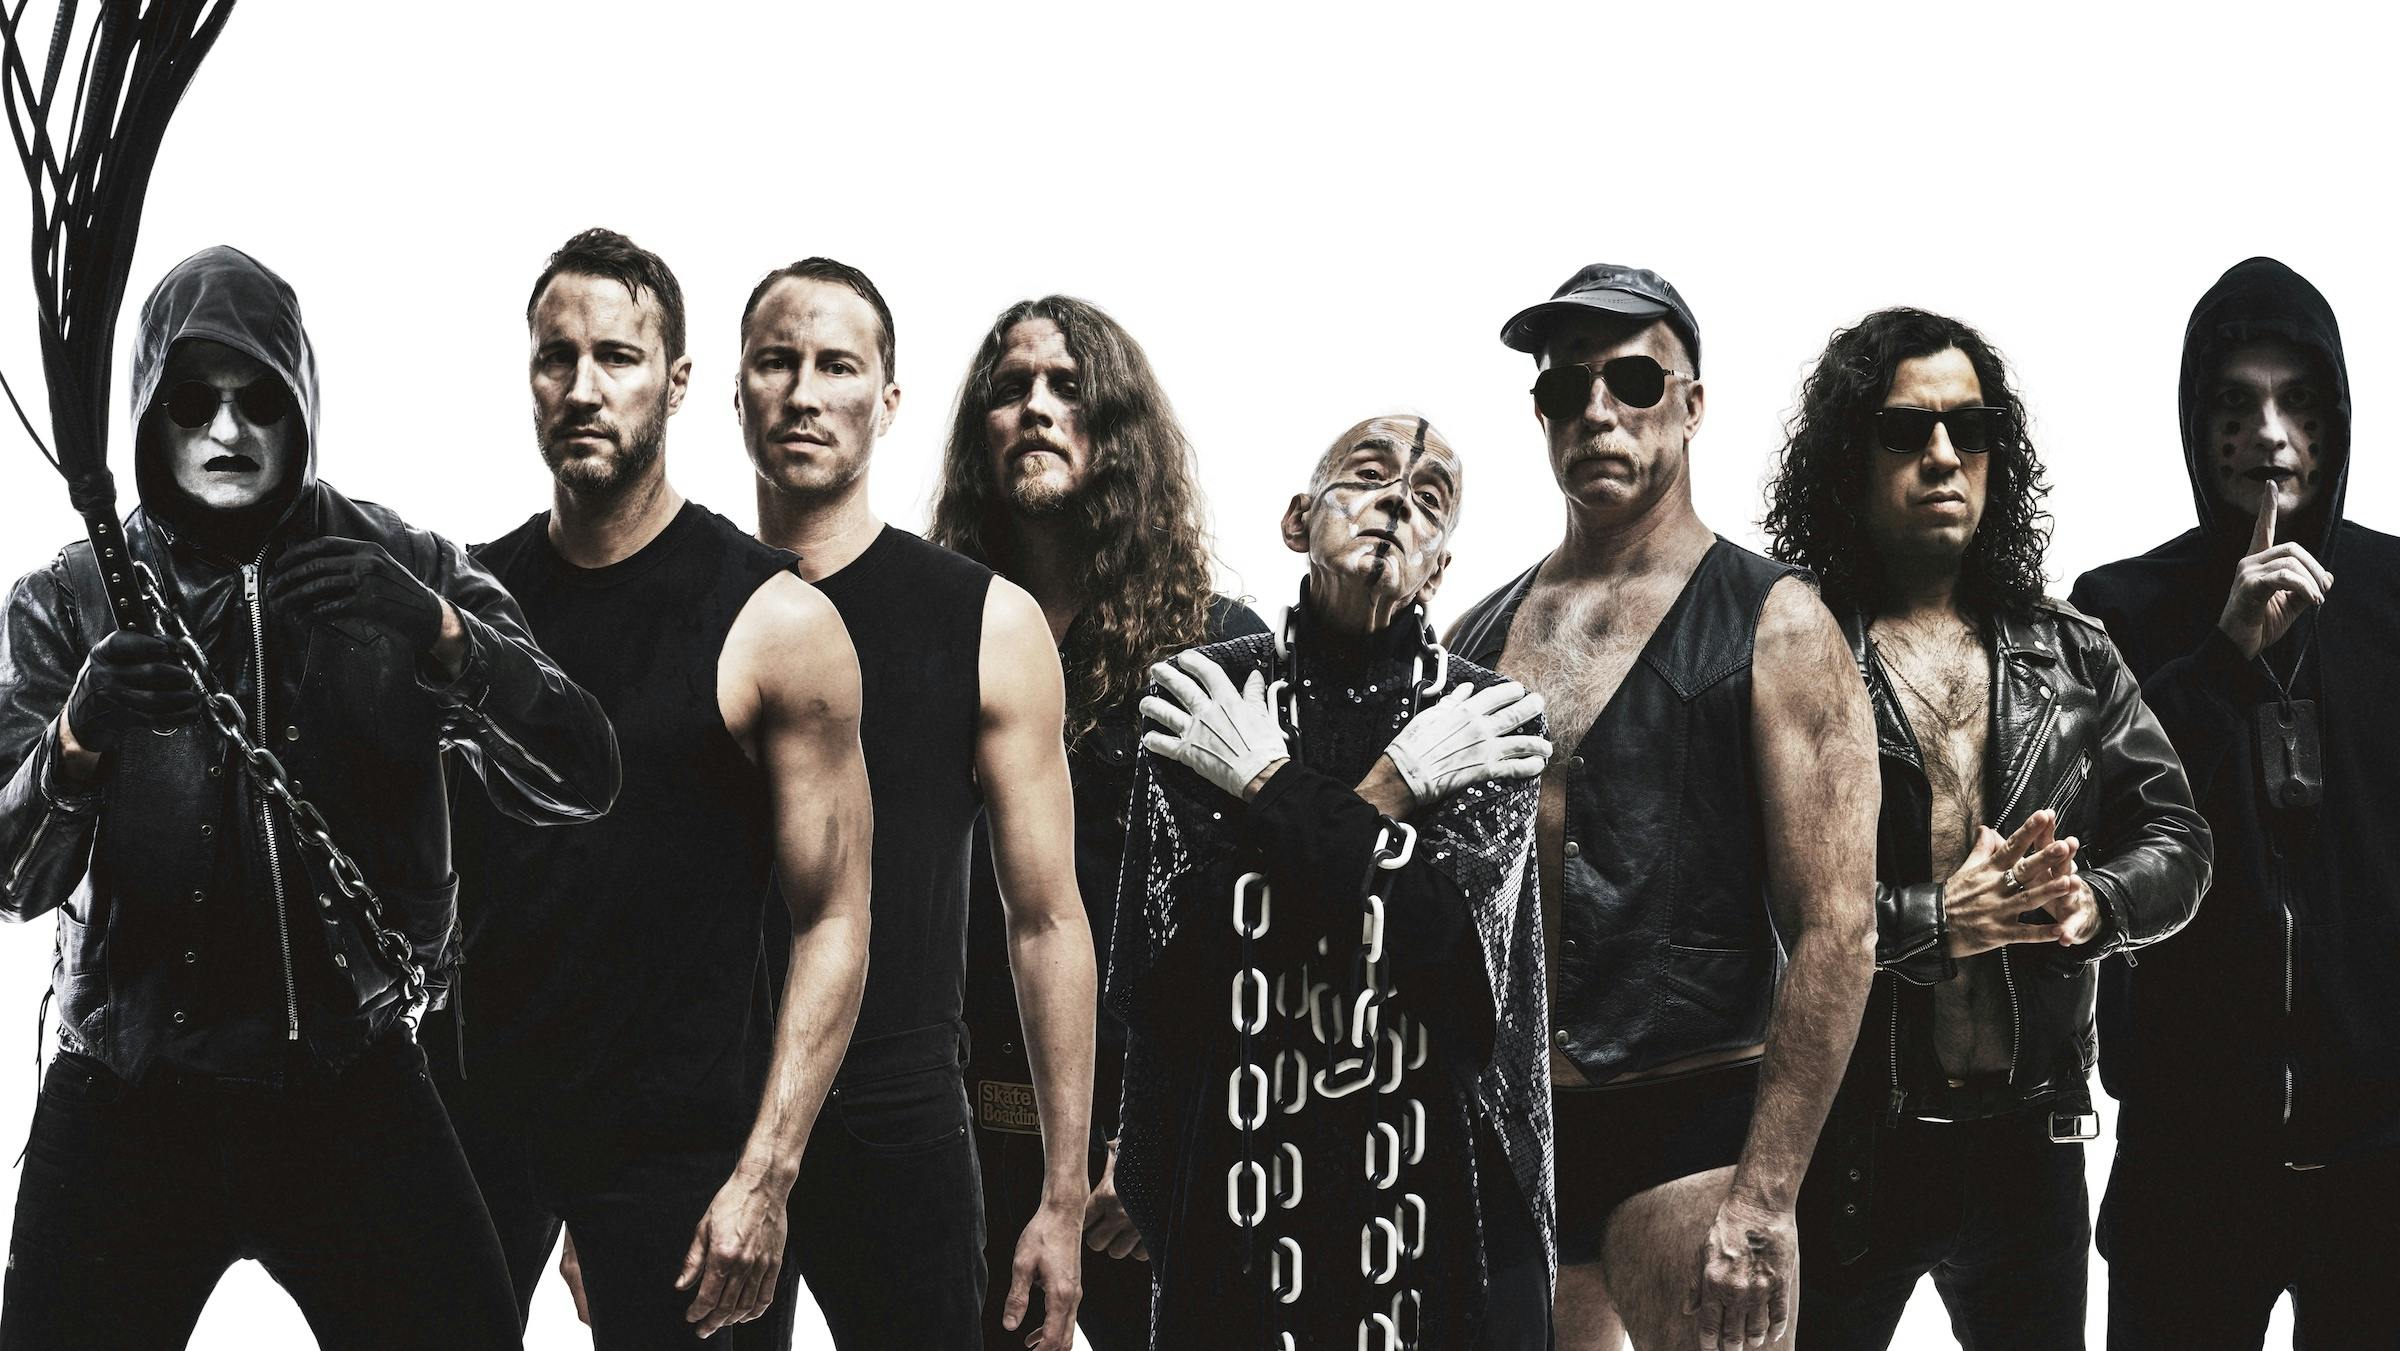 Nastie Band (Faith No More, Villains) Live Up To Their Name On Diabolical New Track